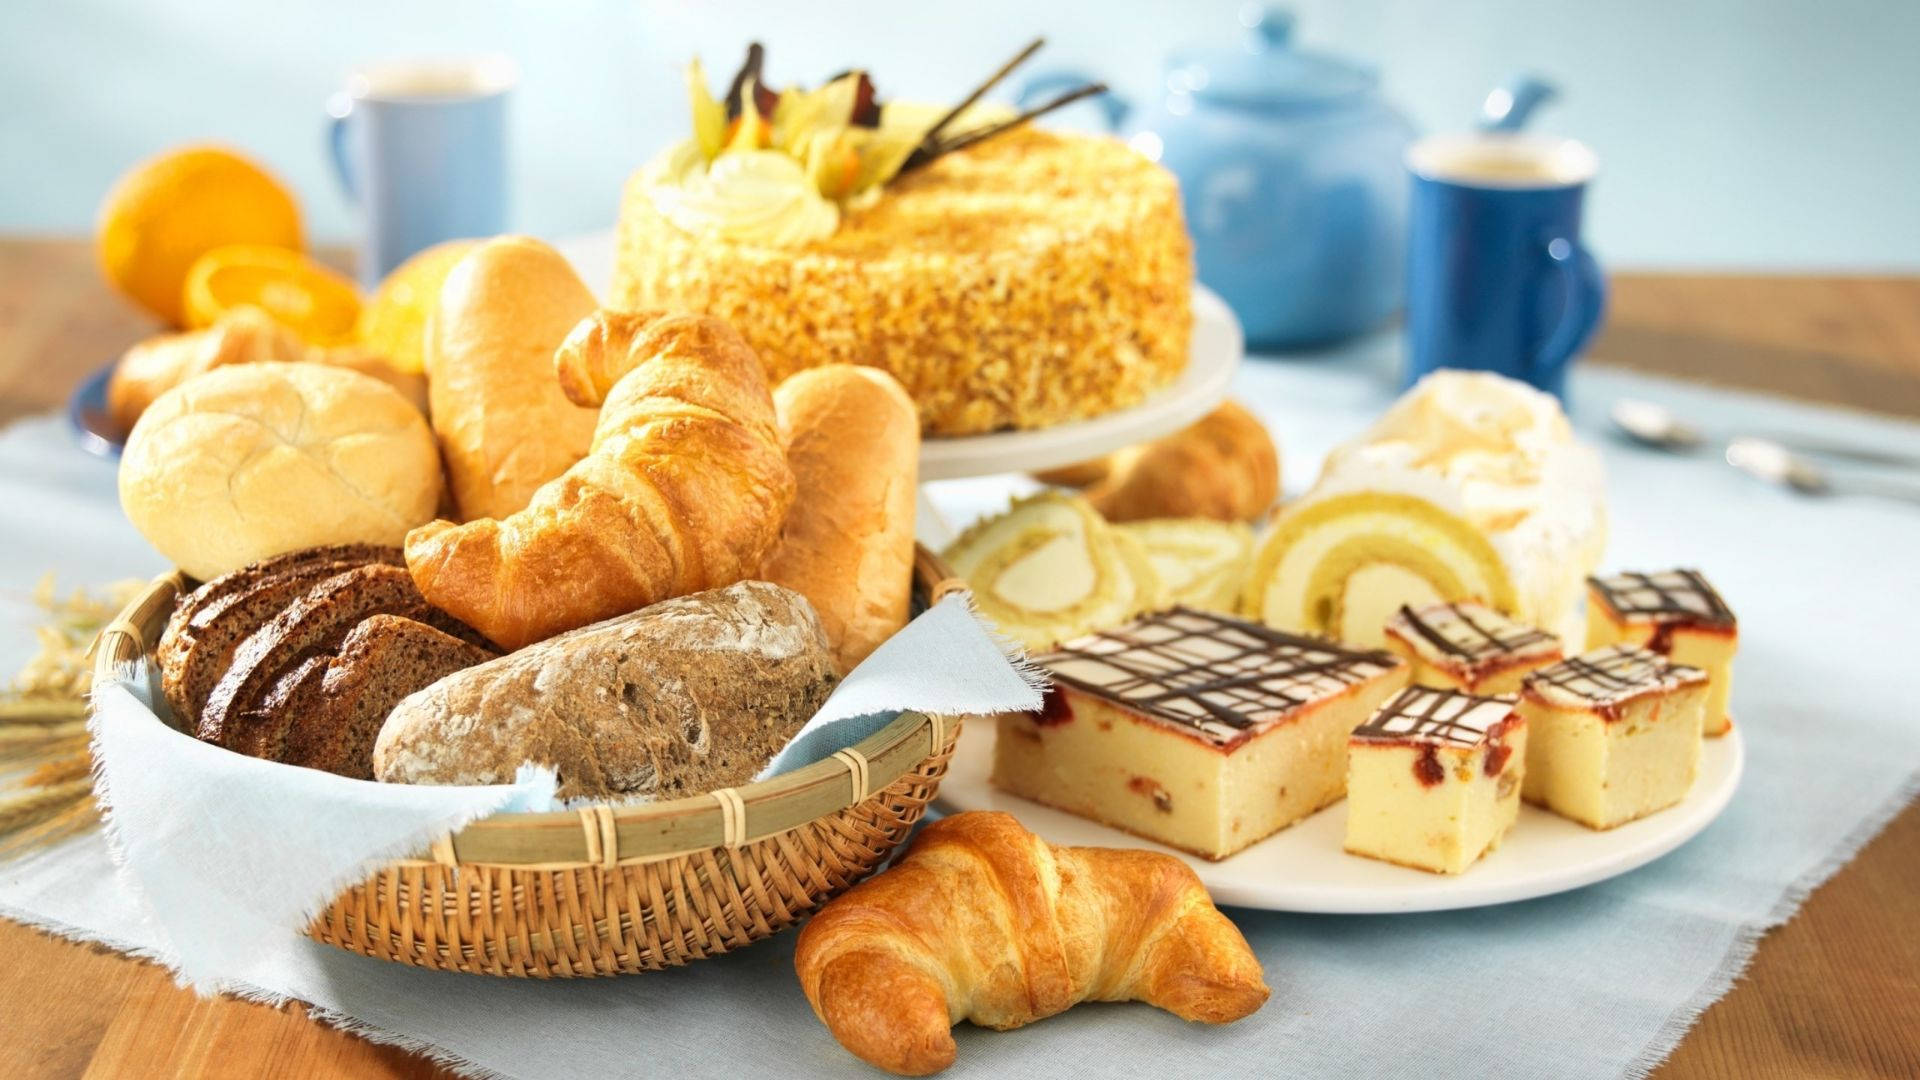 Breads With Desserts